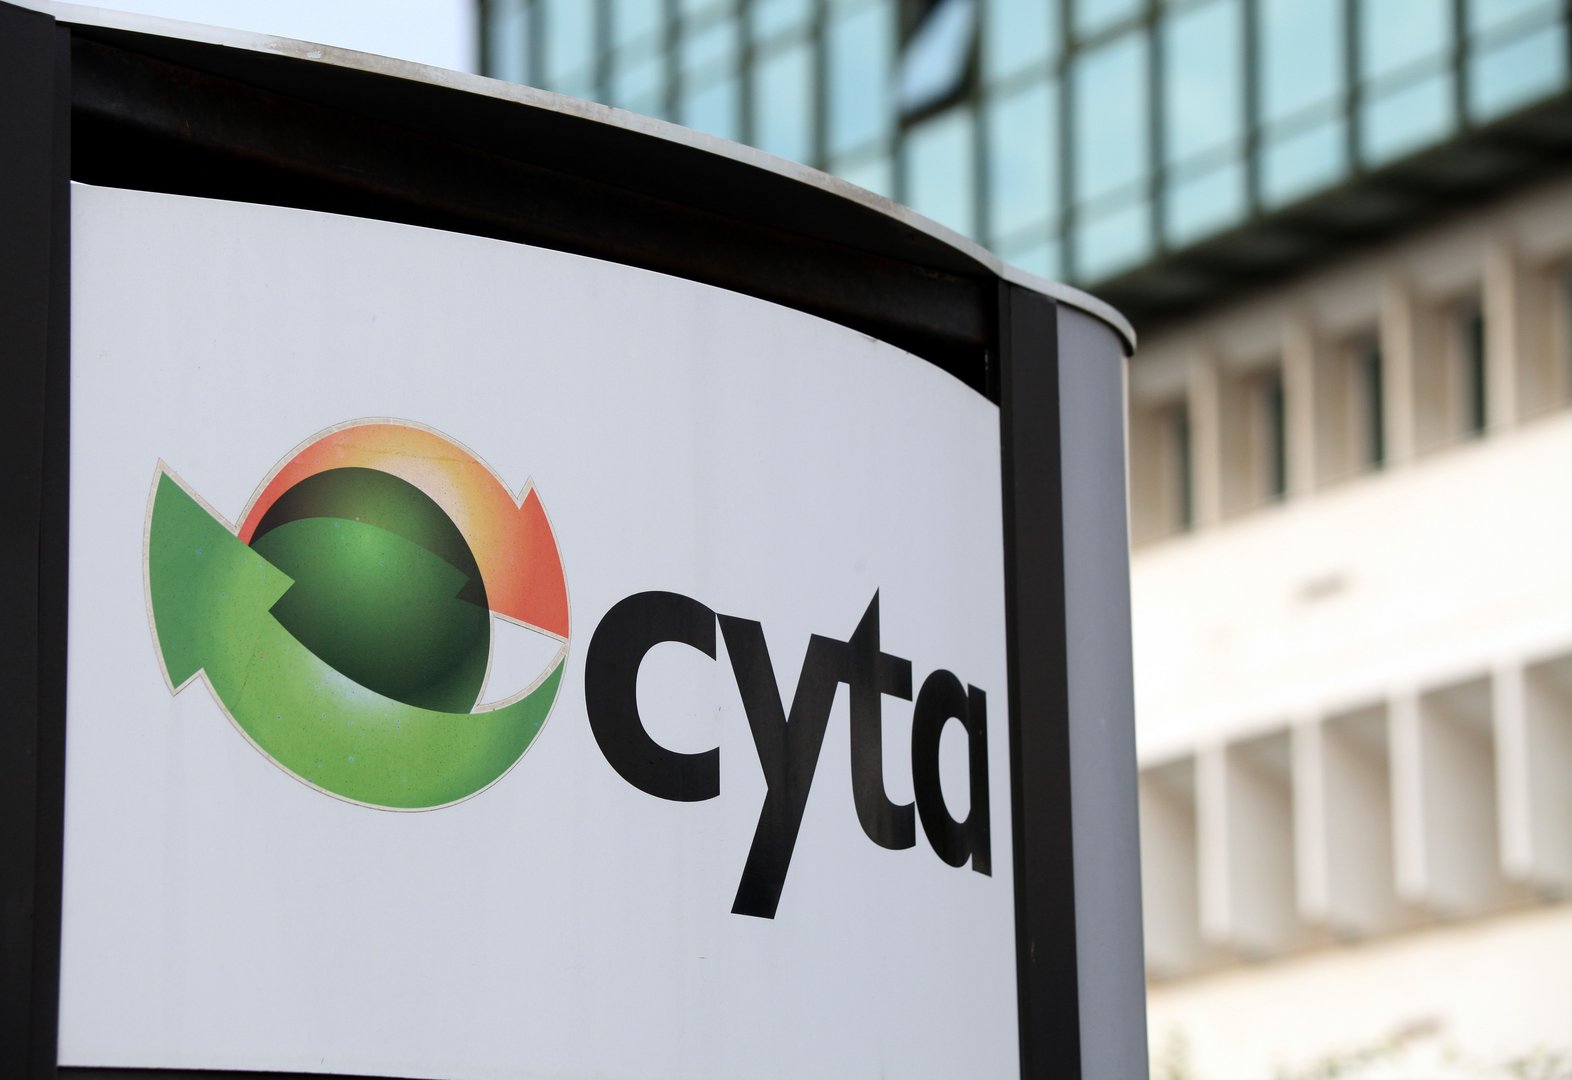 image Our View: State-backed Cyta could threaten free market competition